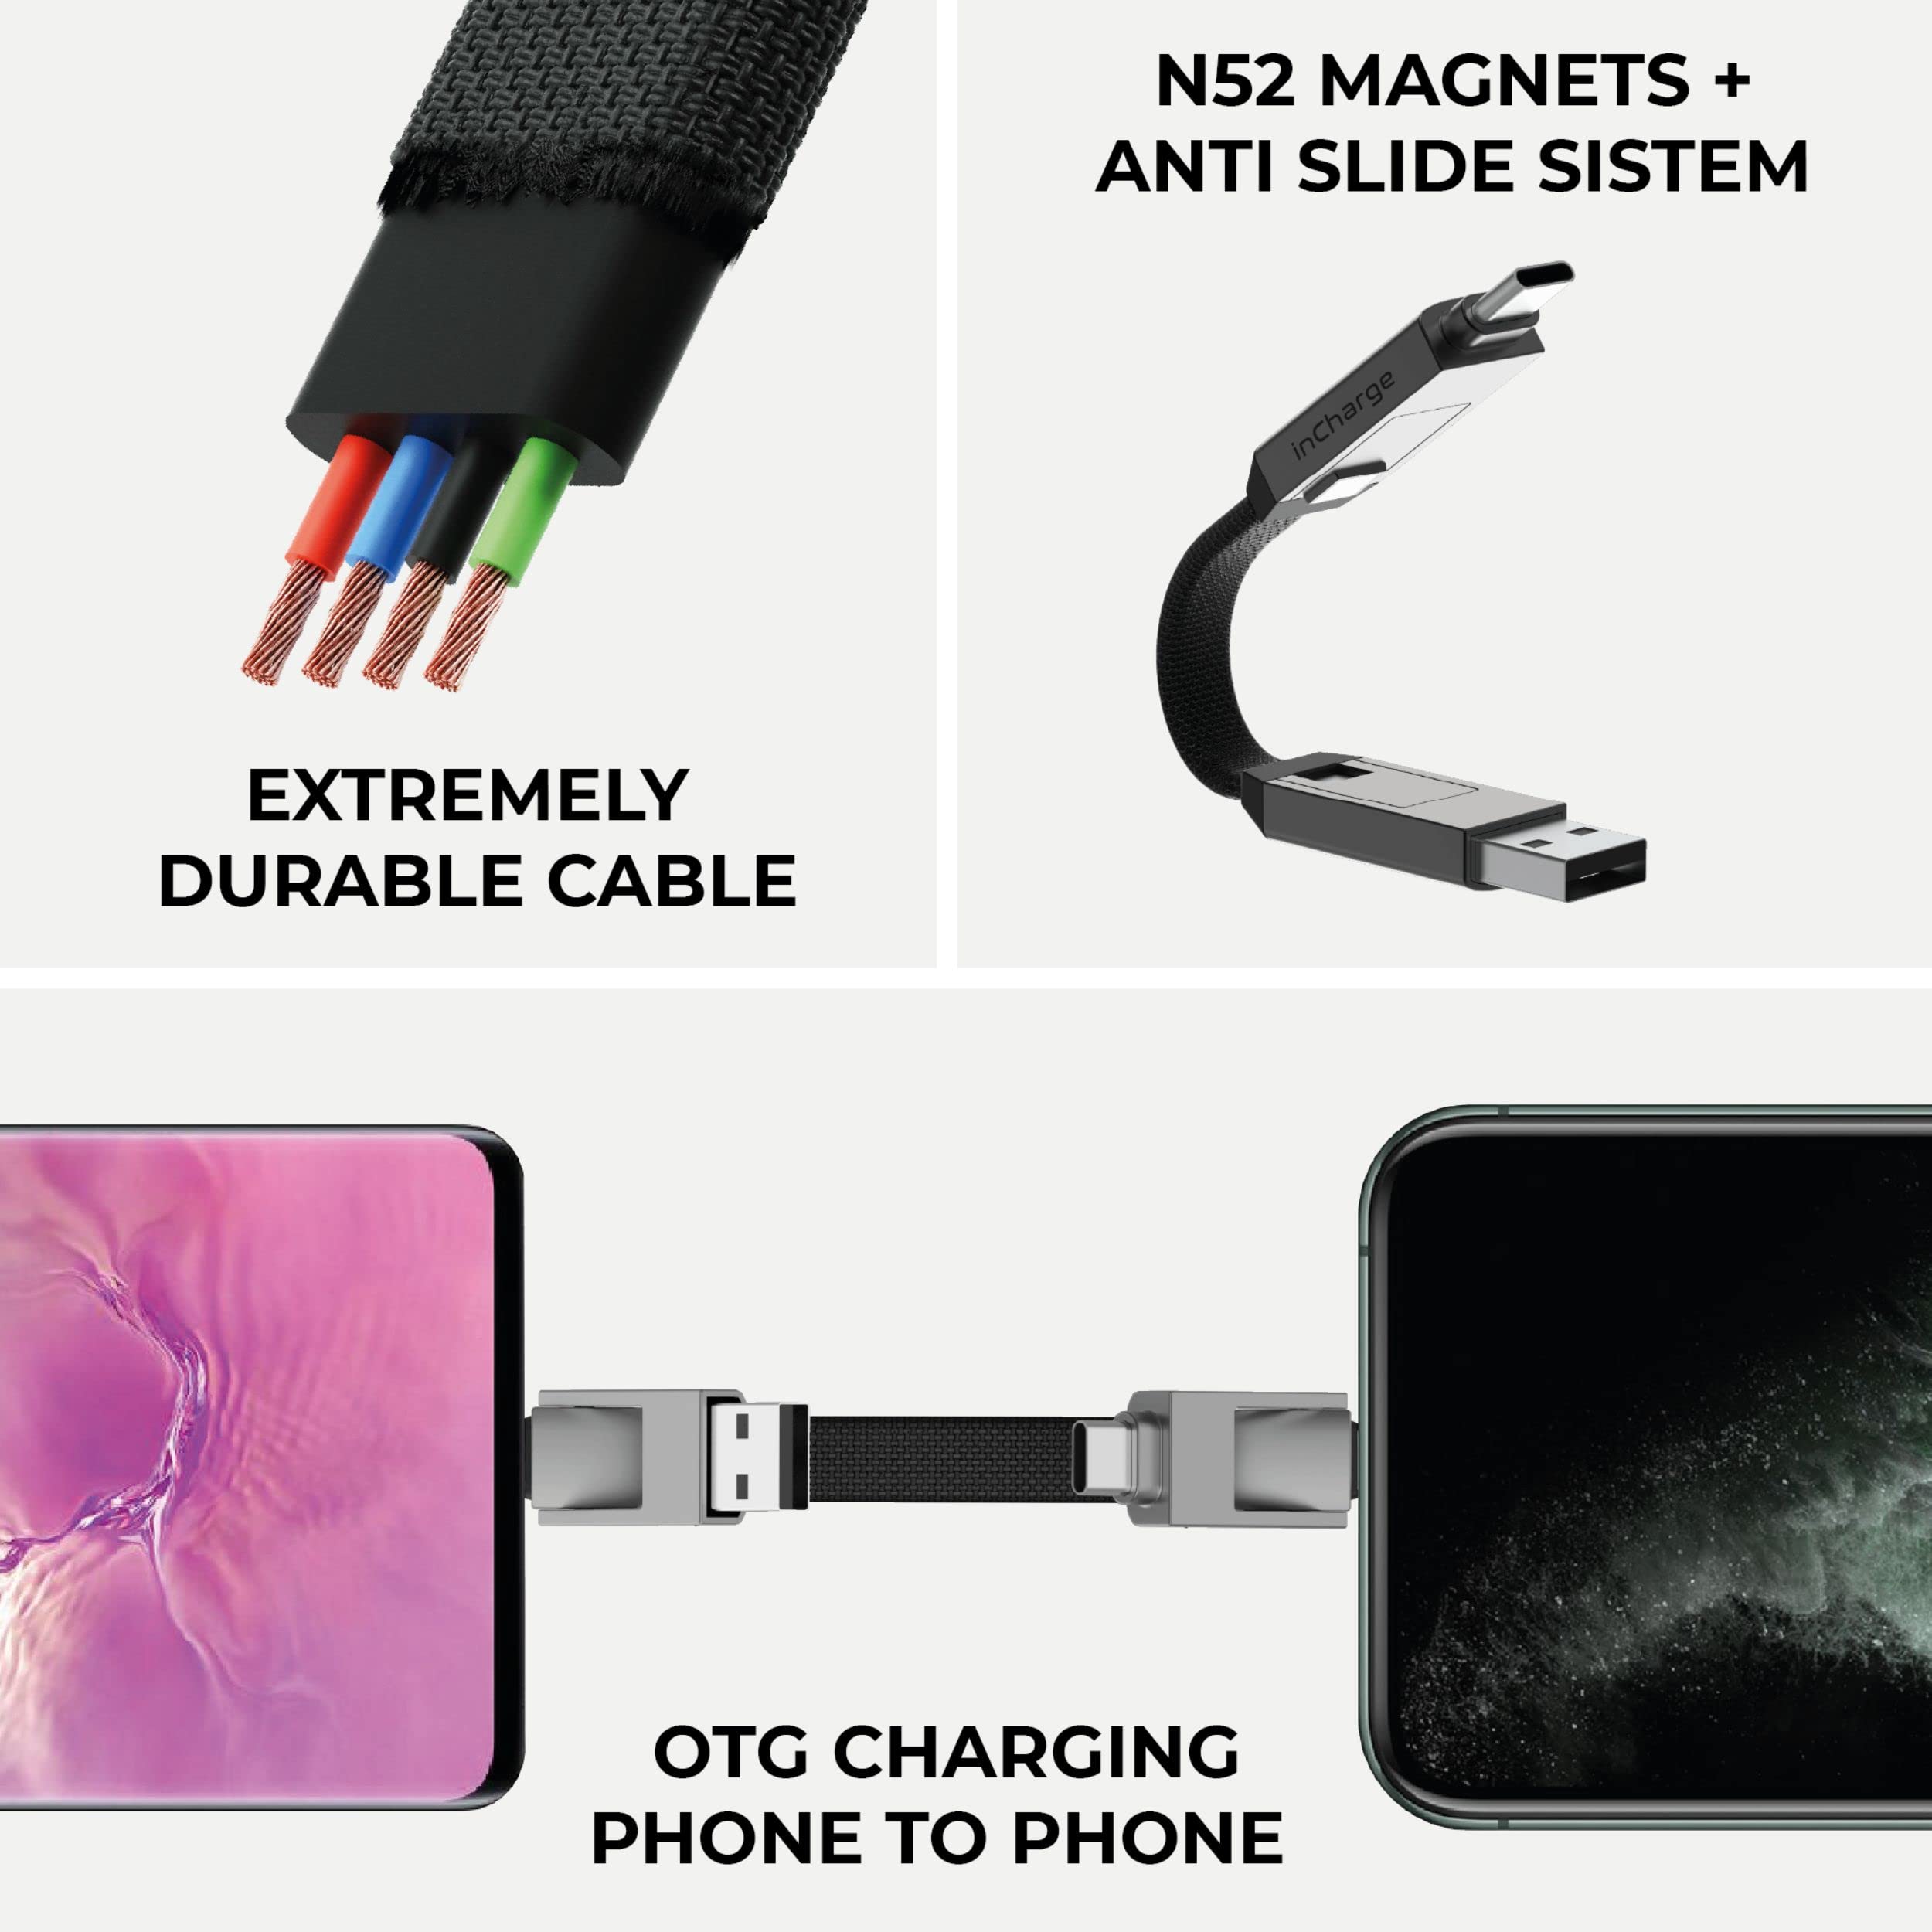 Rolling Square inCharge 6 Portable Keychain Charger Cable, 6-in-1 Multi Charging Cable, Moon White for Laptop